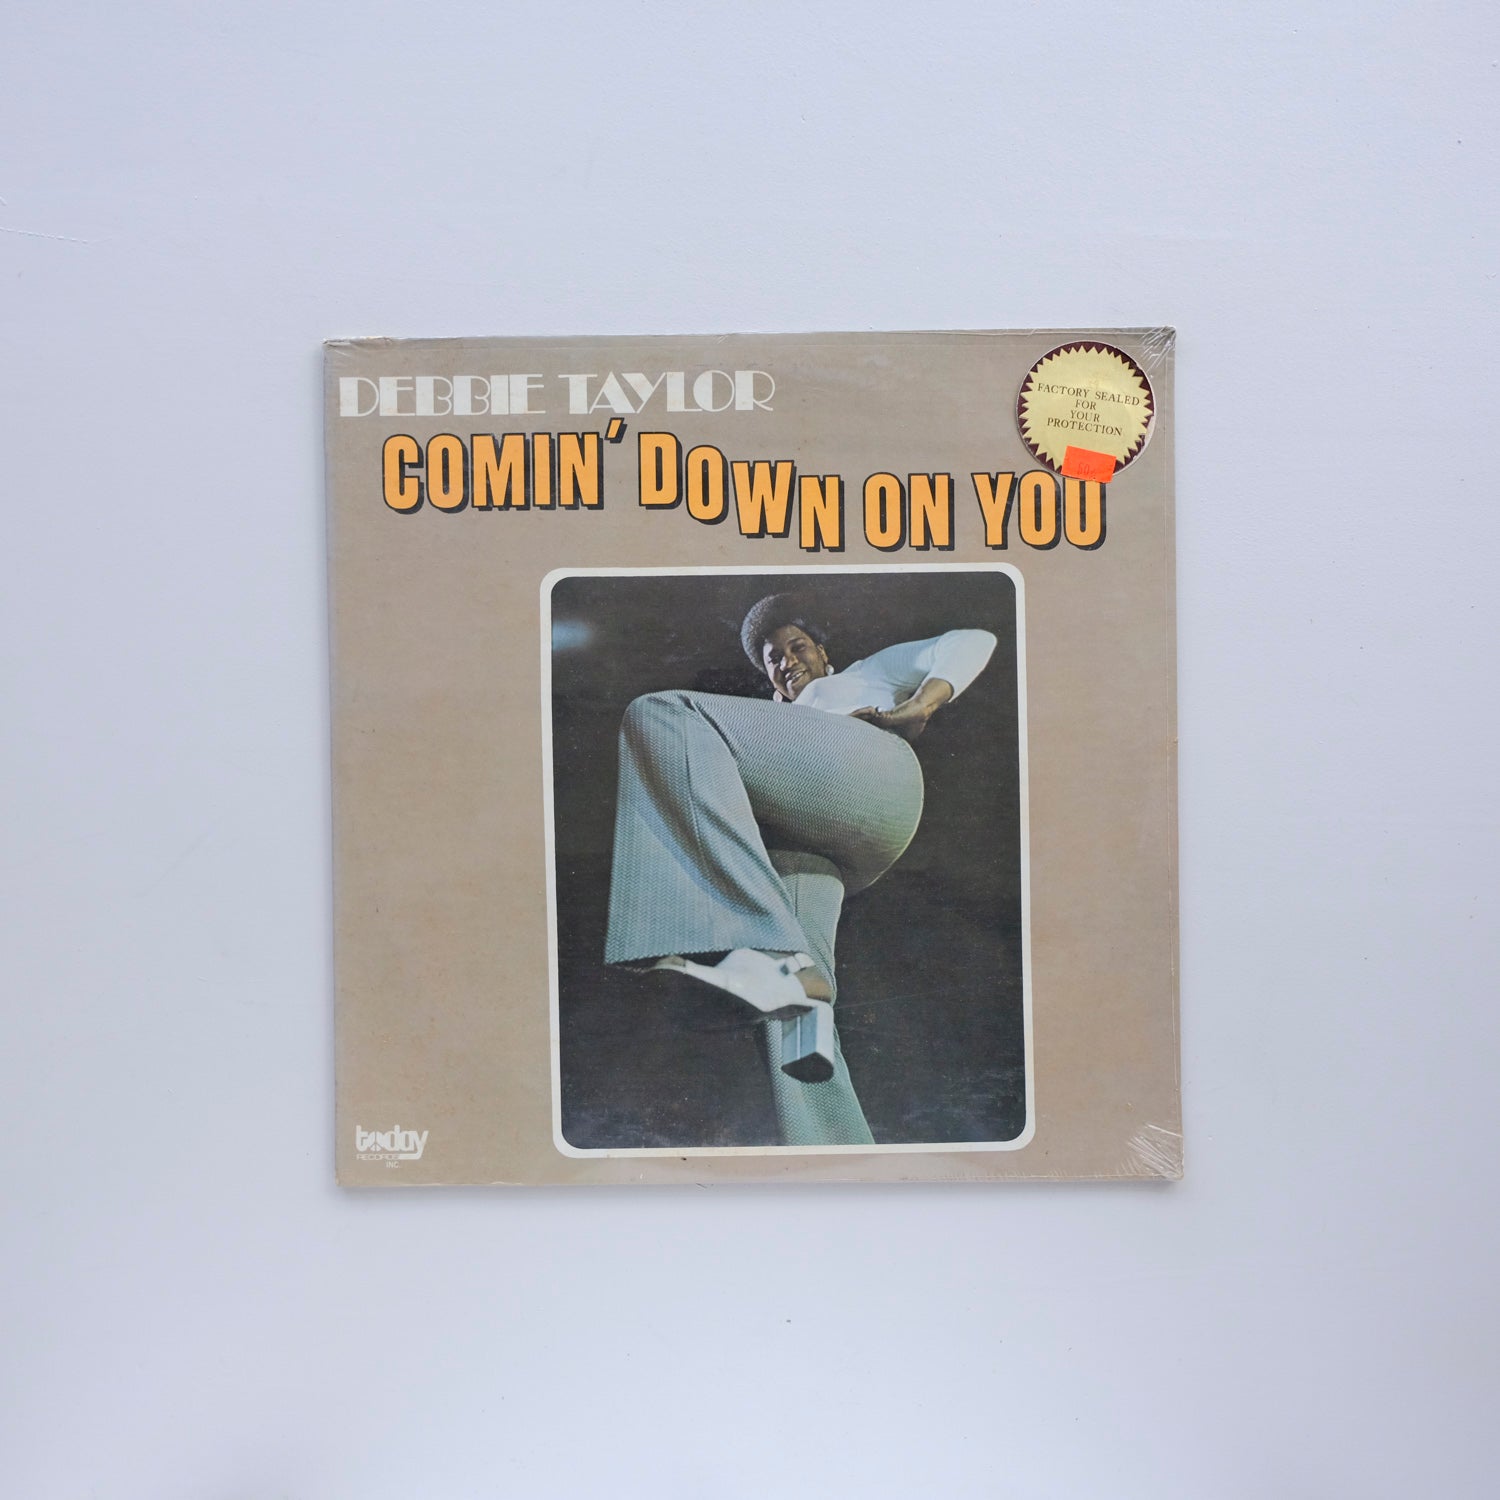 Debbie Taylor - Comin' Down On You [sealed]